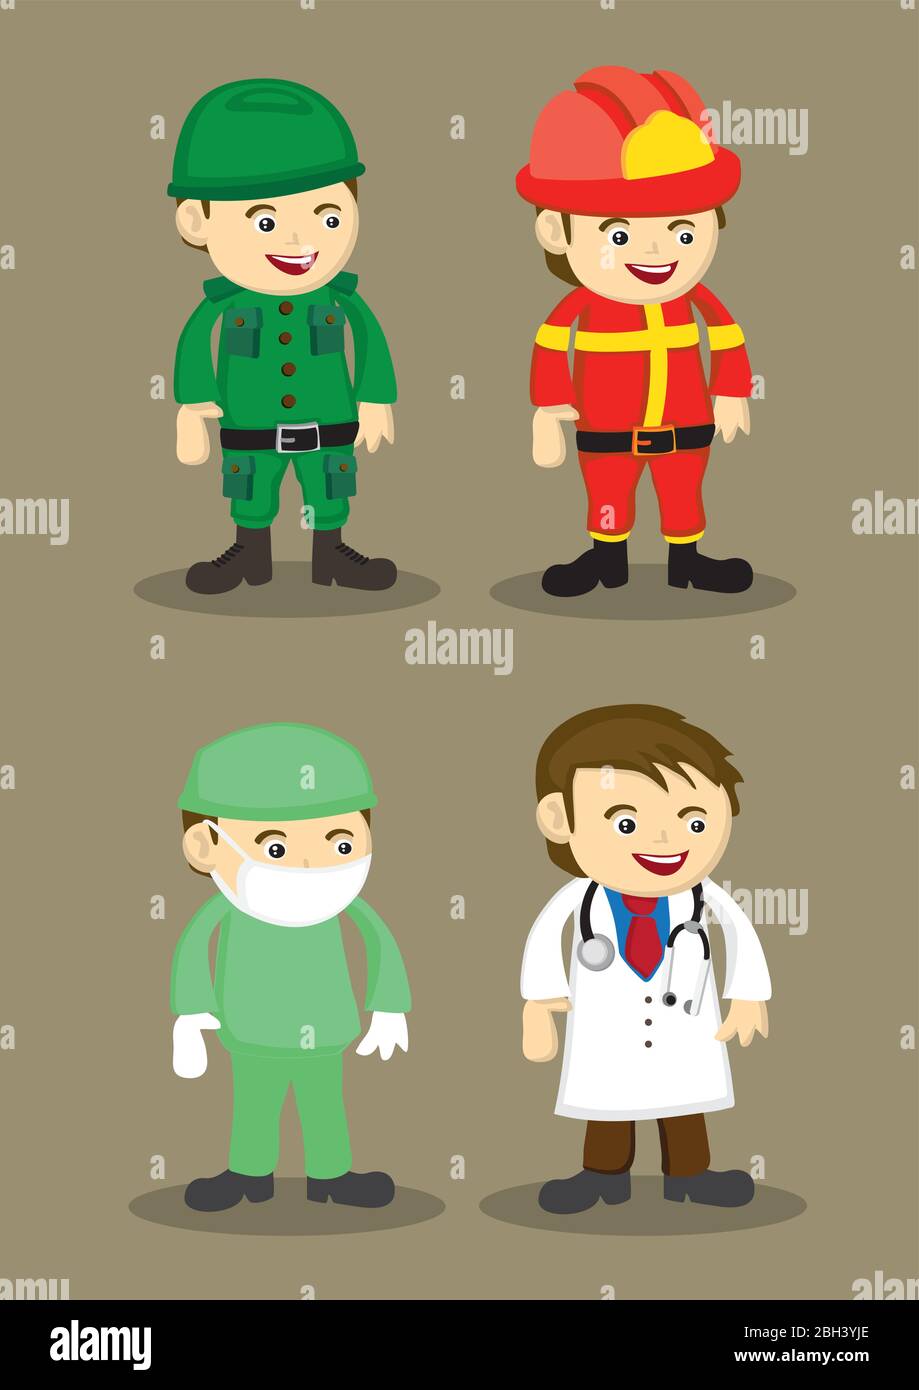 Soldier, firefighter, Surgeon and Doctor in uniform and work attire. Professionals and occupations vector illustration isolated on brown plain backgro Stock Vector